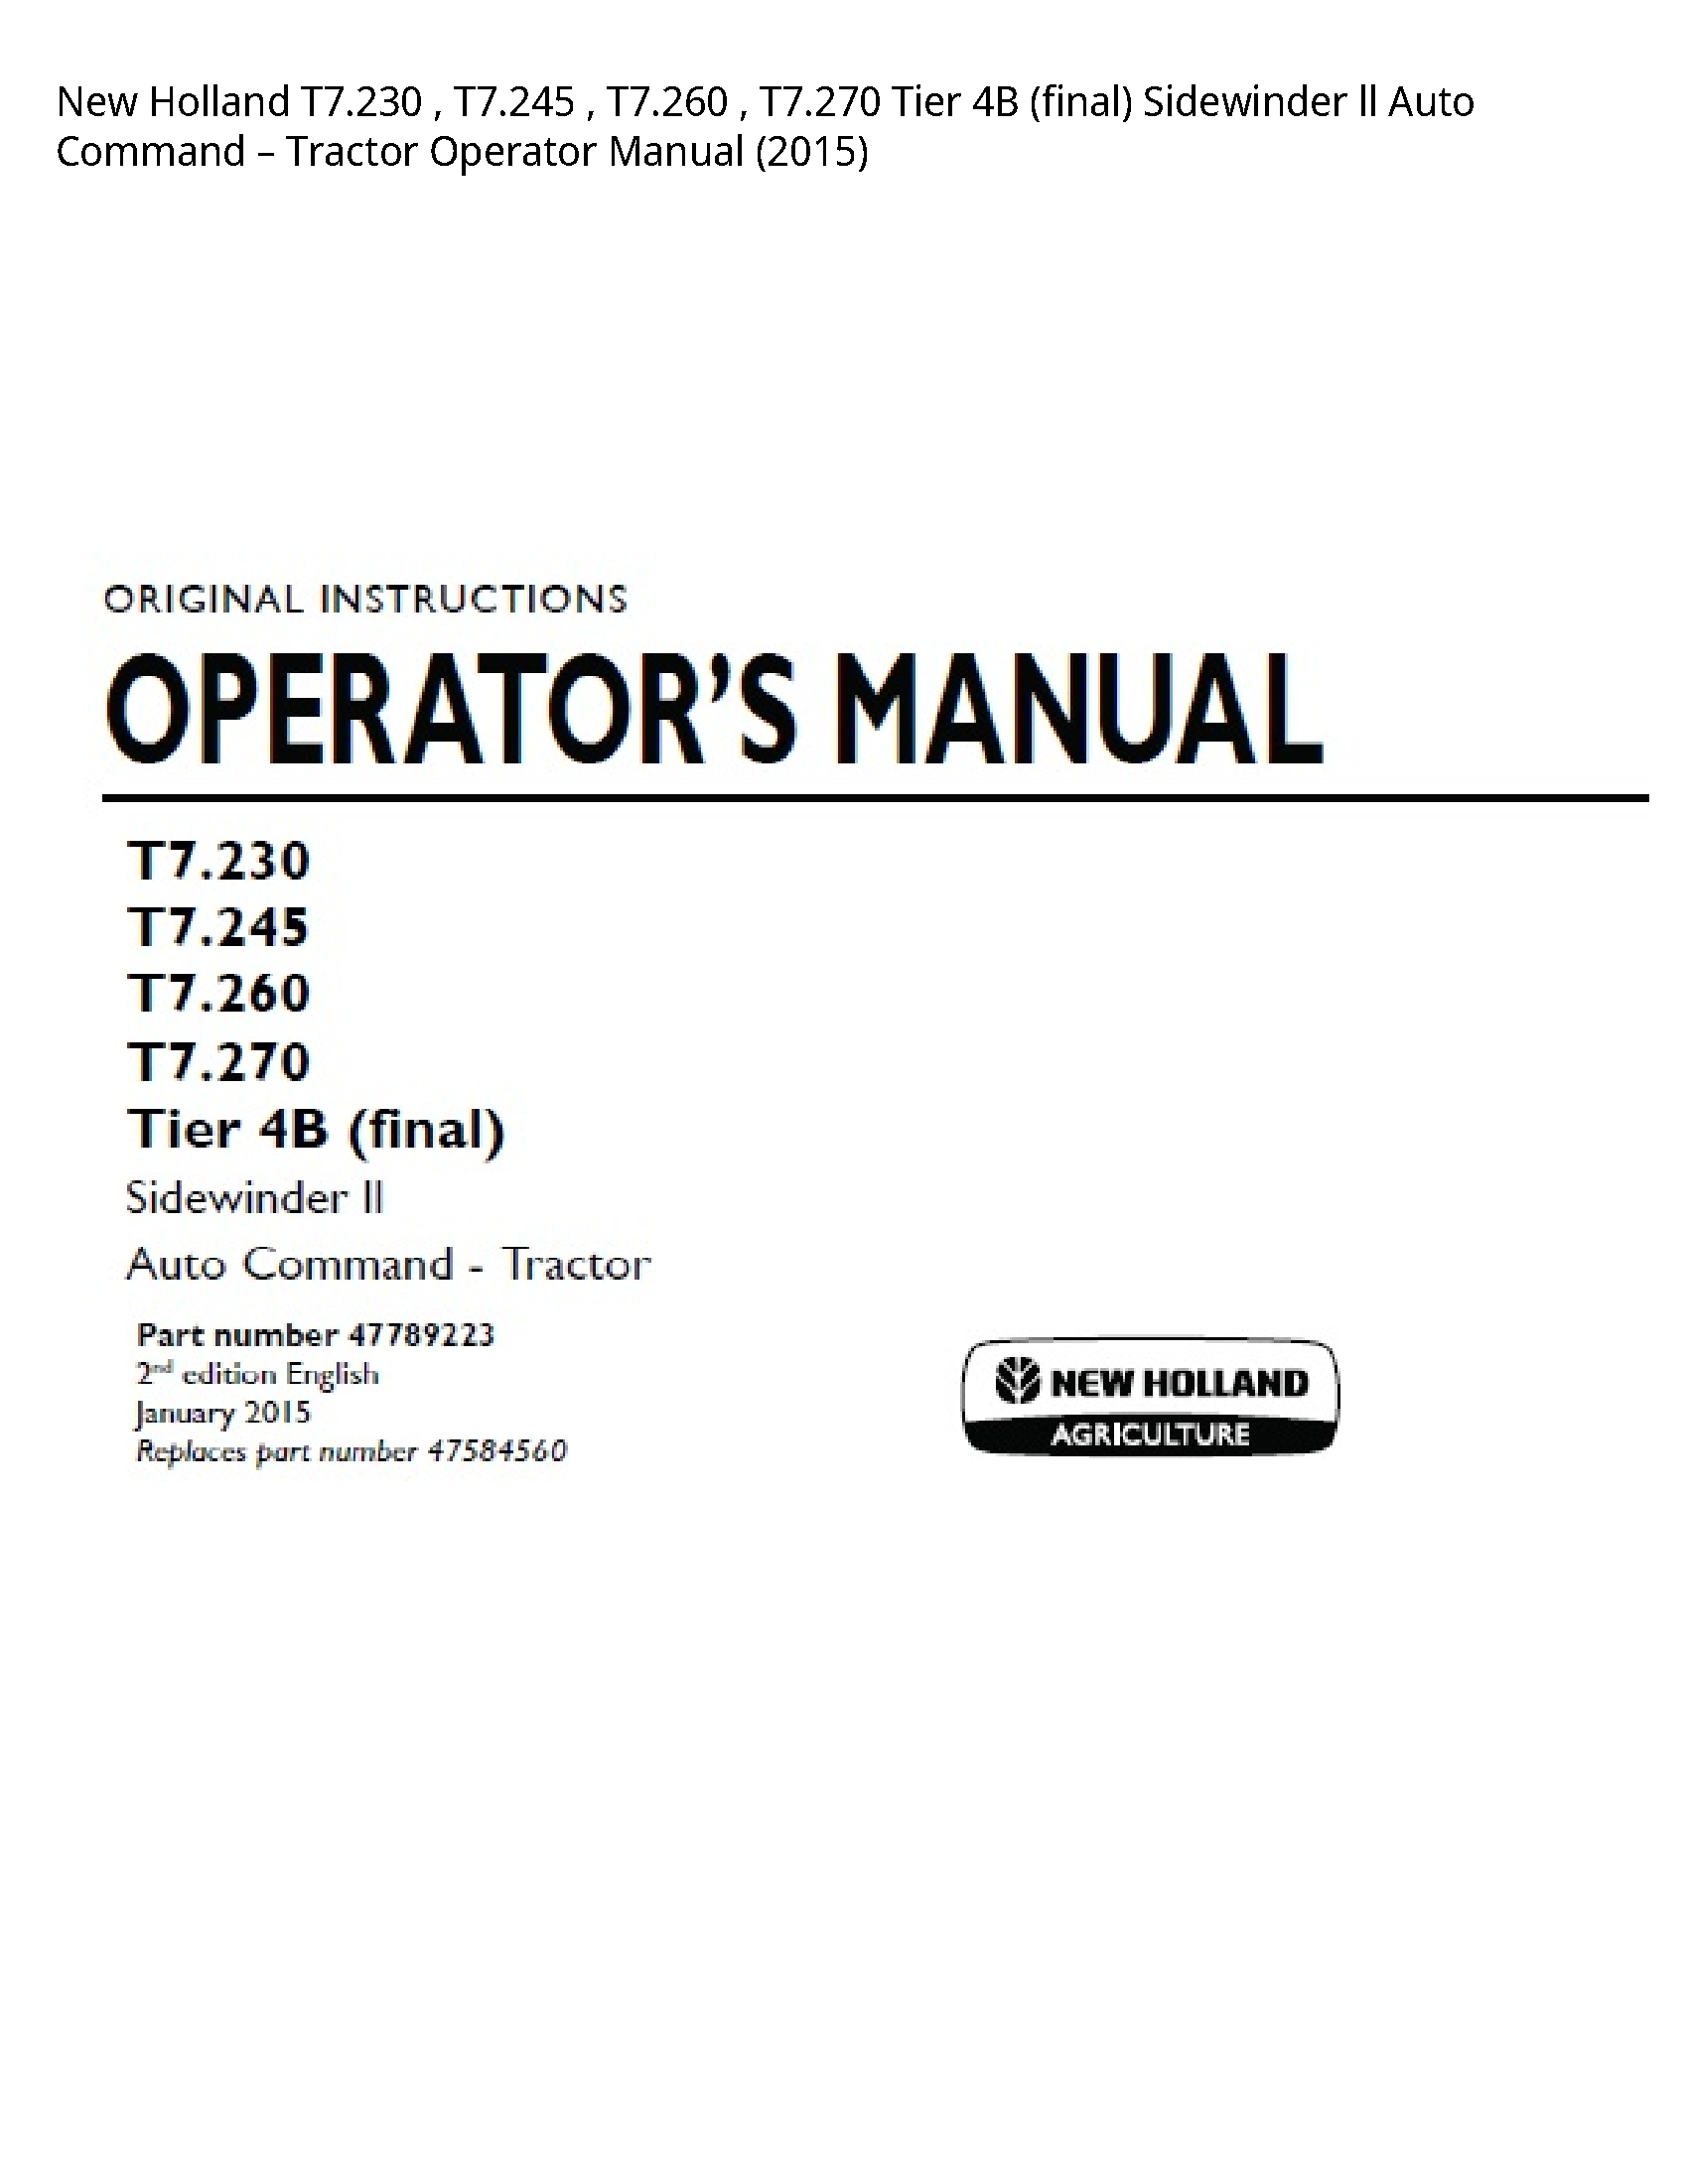 New Holland T7.230 Tier (final) Sidewinder ll Auto Command Tractor Operator manual